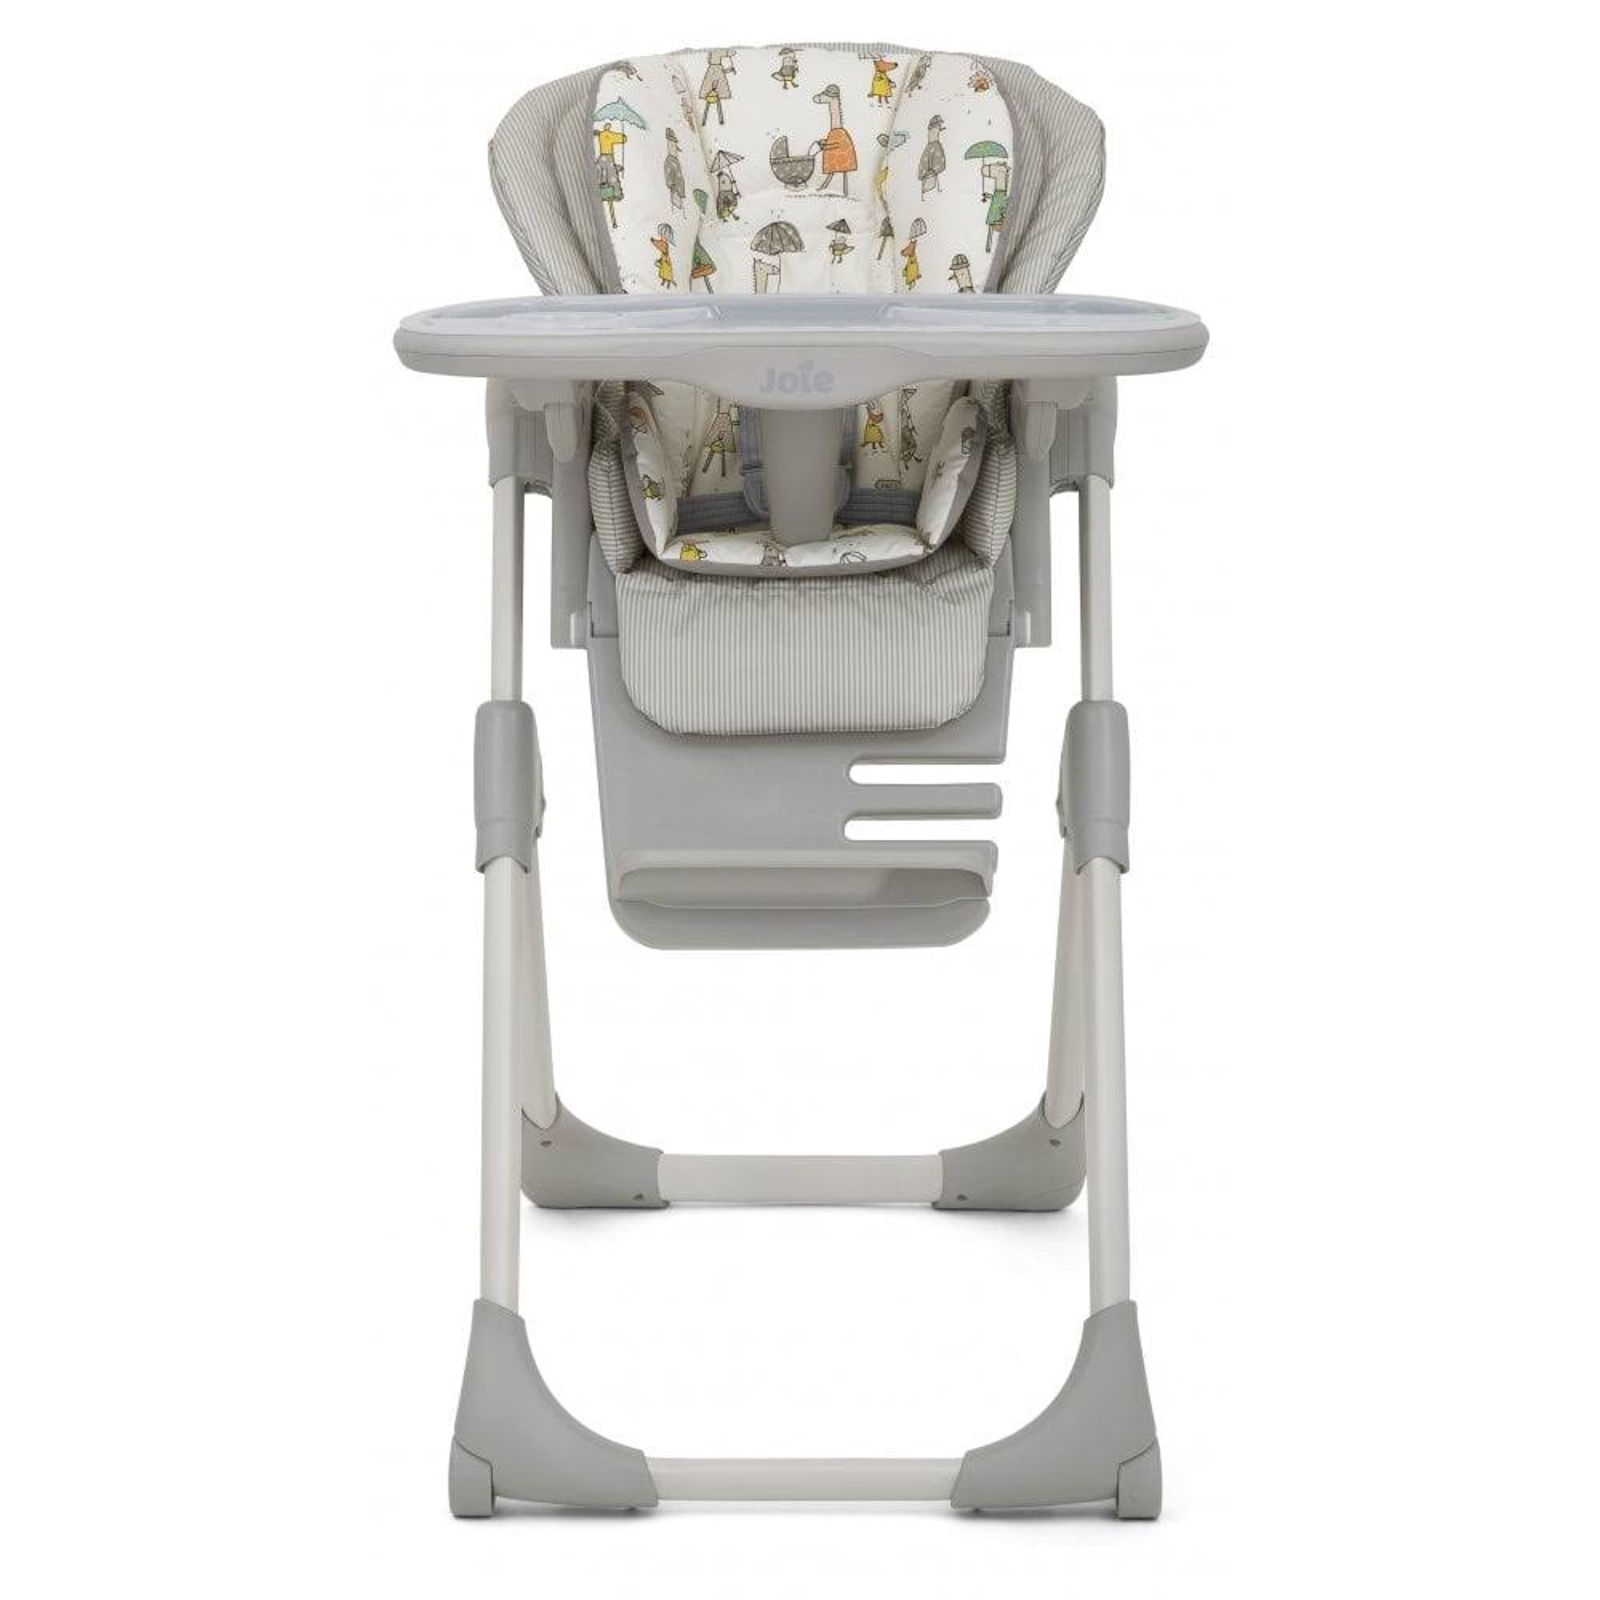  Joie Mimzy  2 in 1 Highchair In The Rain Buy at Online4baby